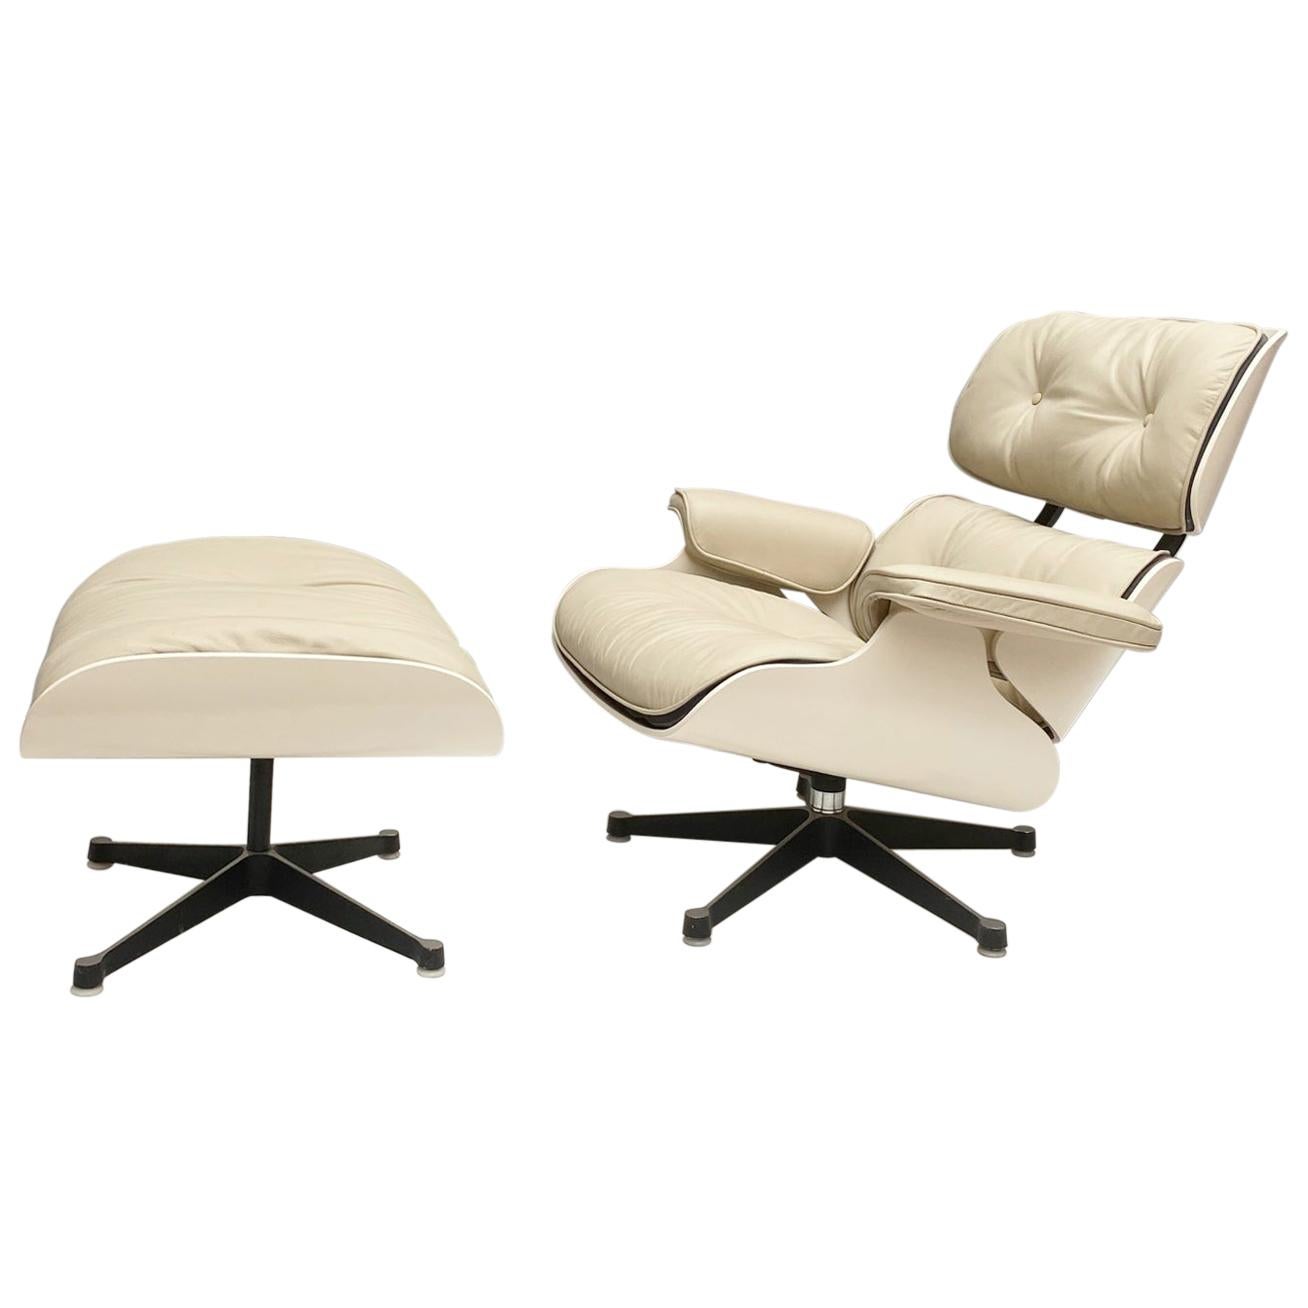 White Lounge Chair and Ottoman in Style of Charles and Ray Eames